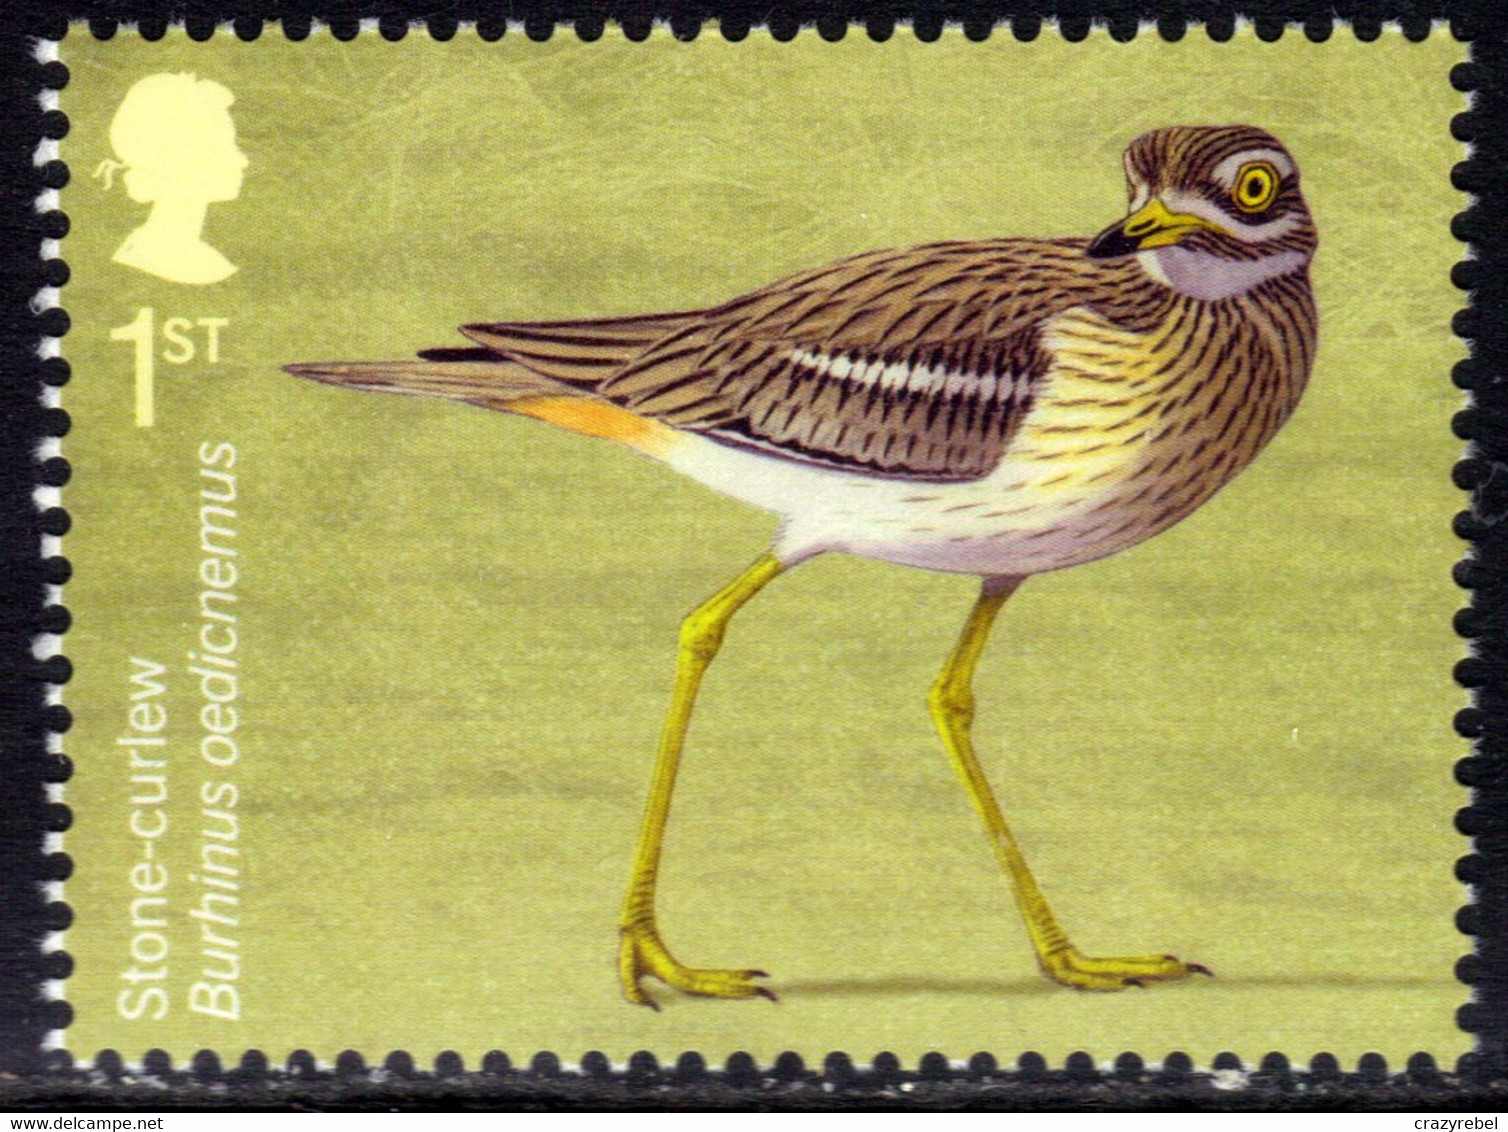 GB 2022 QE2 1st Migratory Birds Stone Curlew Umm ( A854 ) - Unused Stamps